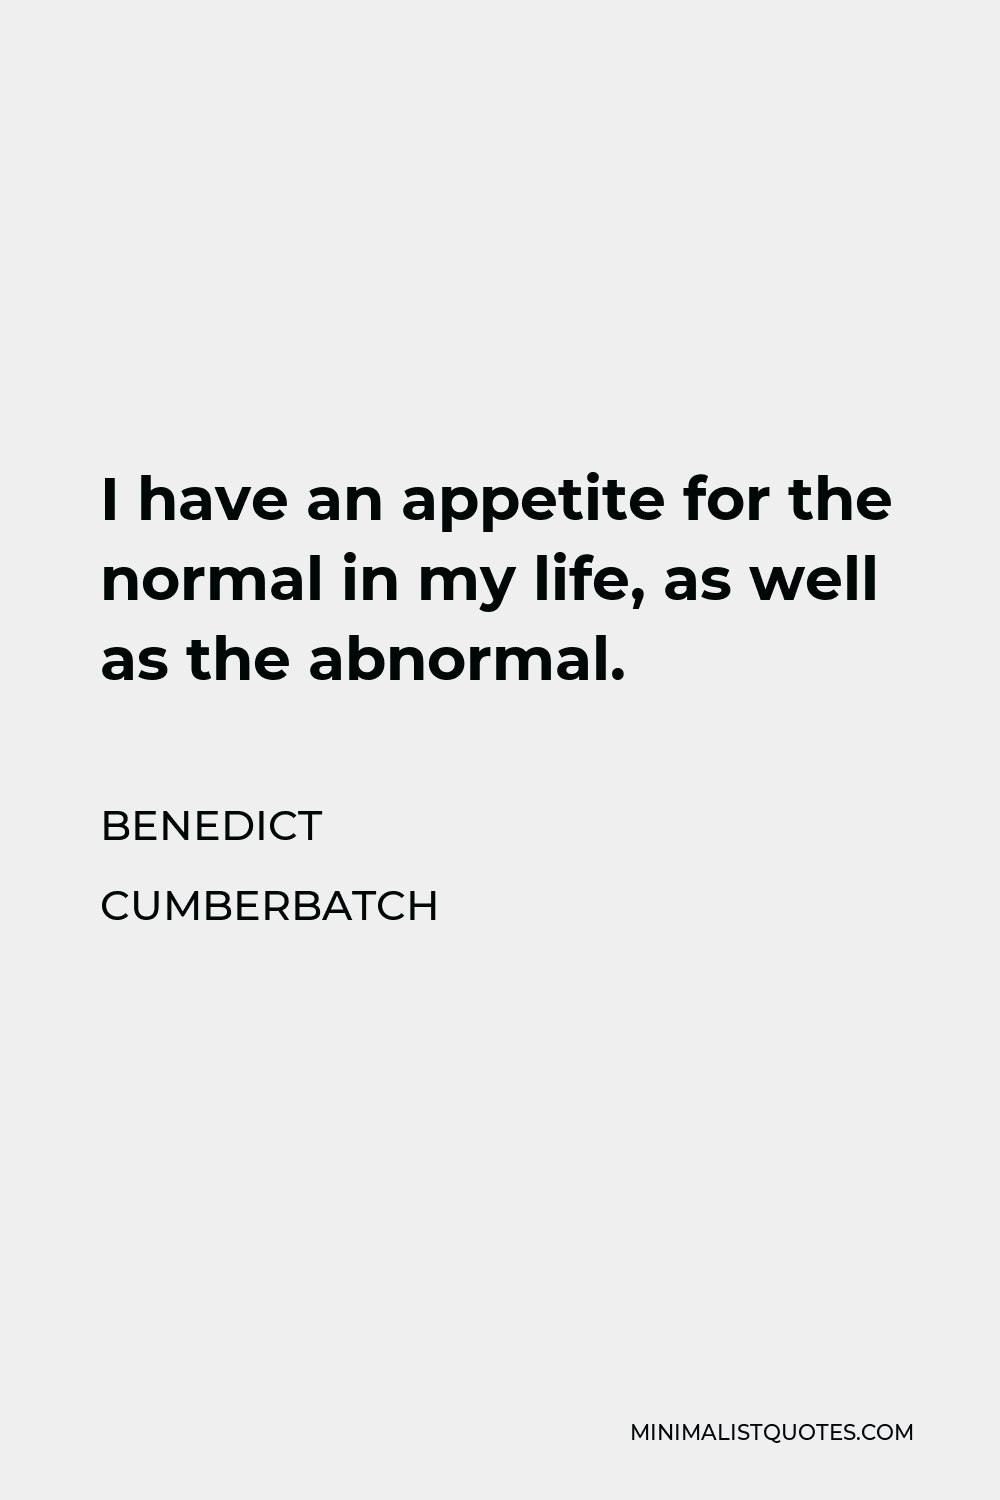 Benedict Cumberbatch Quote - I have an appetite for the normal in my life, as well as the abnormal.